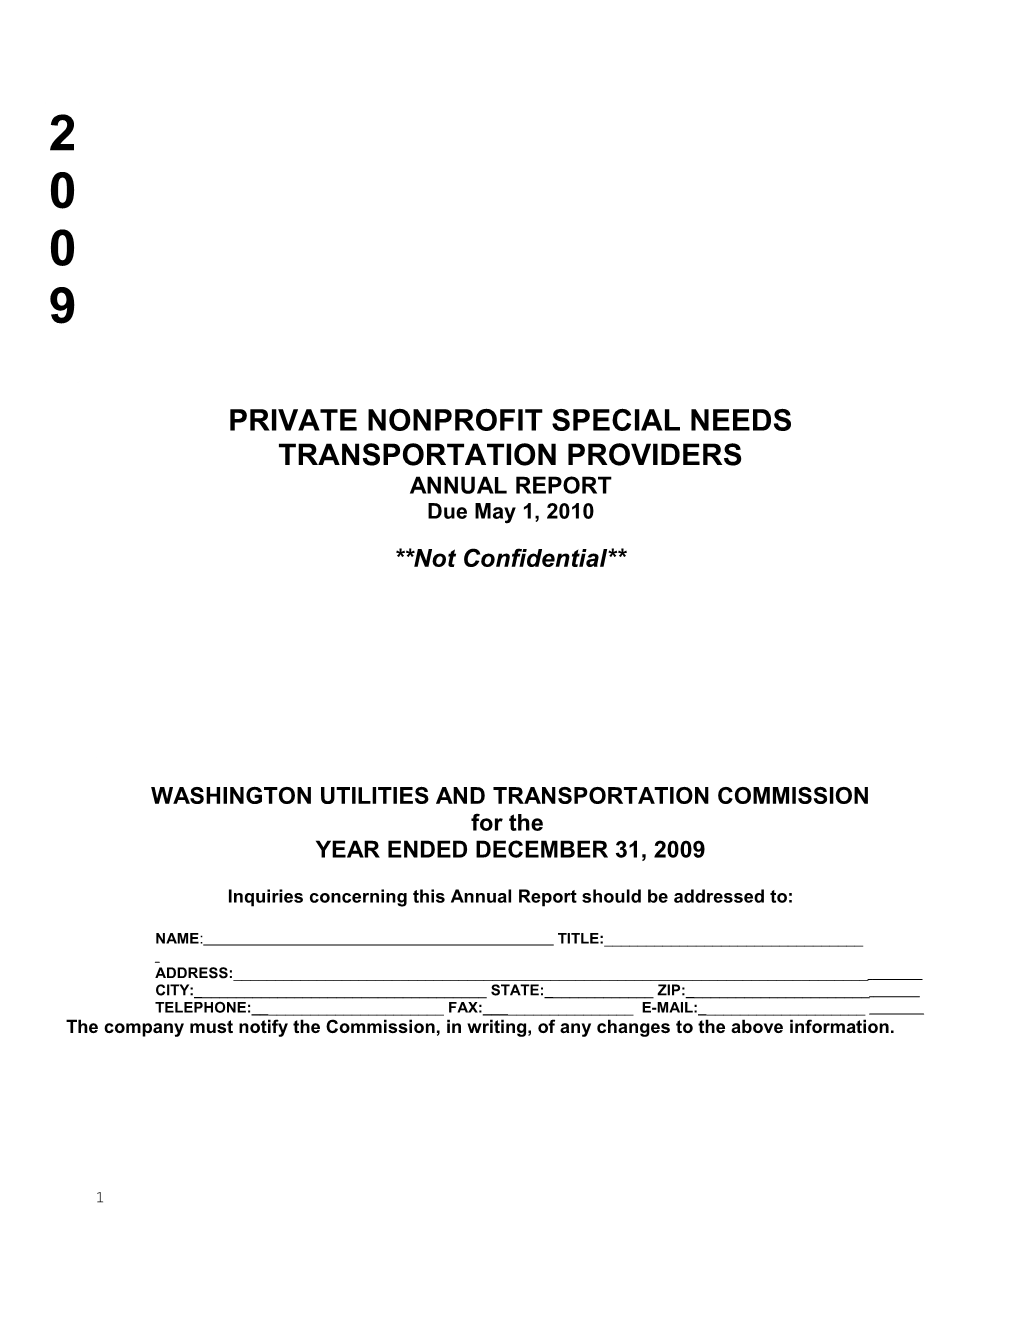 Annual Report Form - Non-Profit Buses - 2009